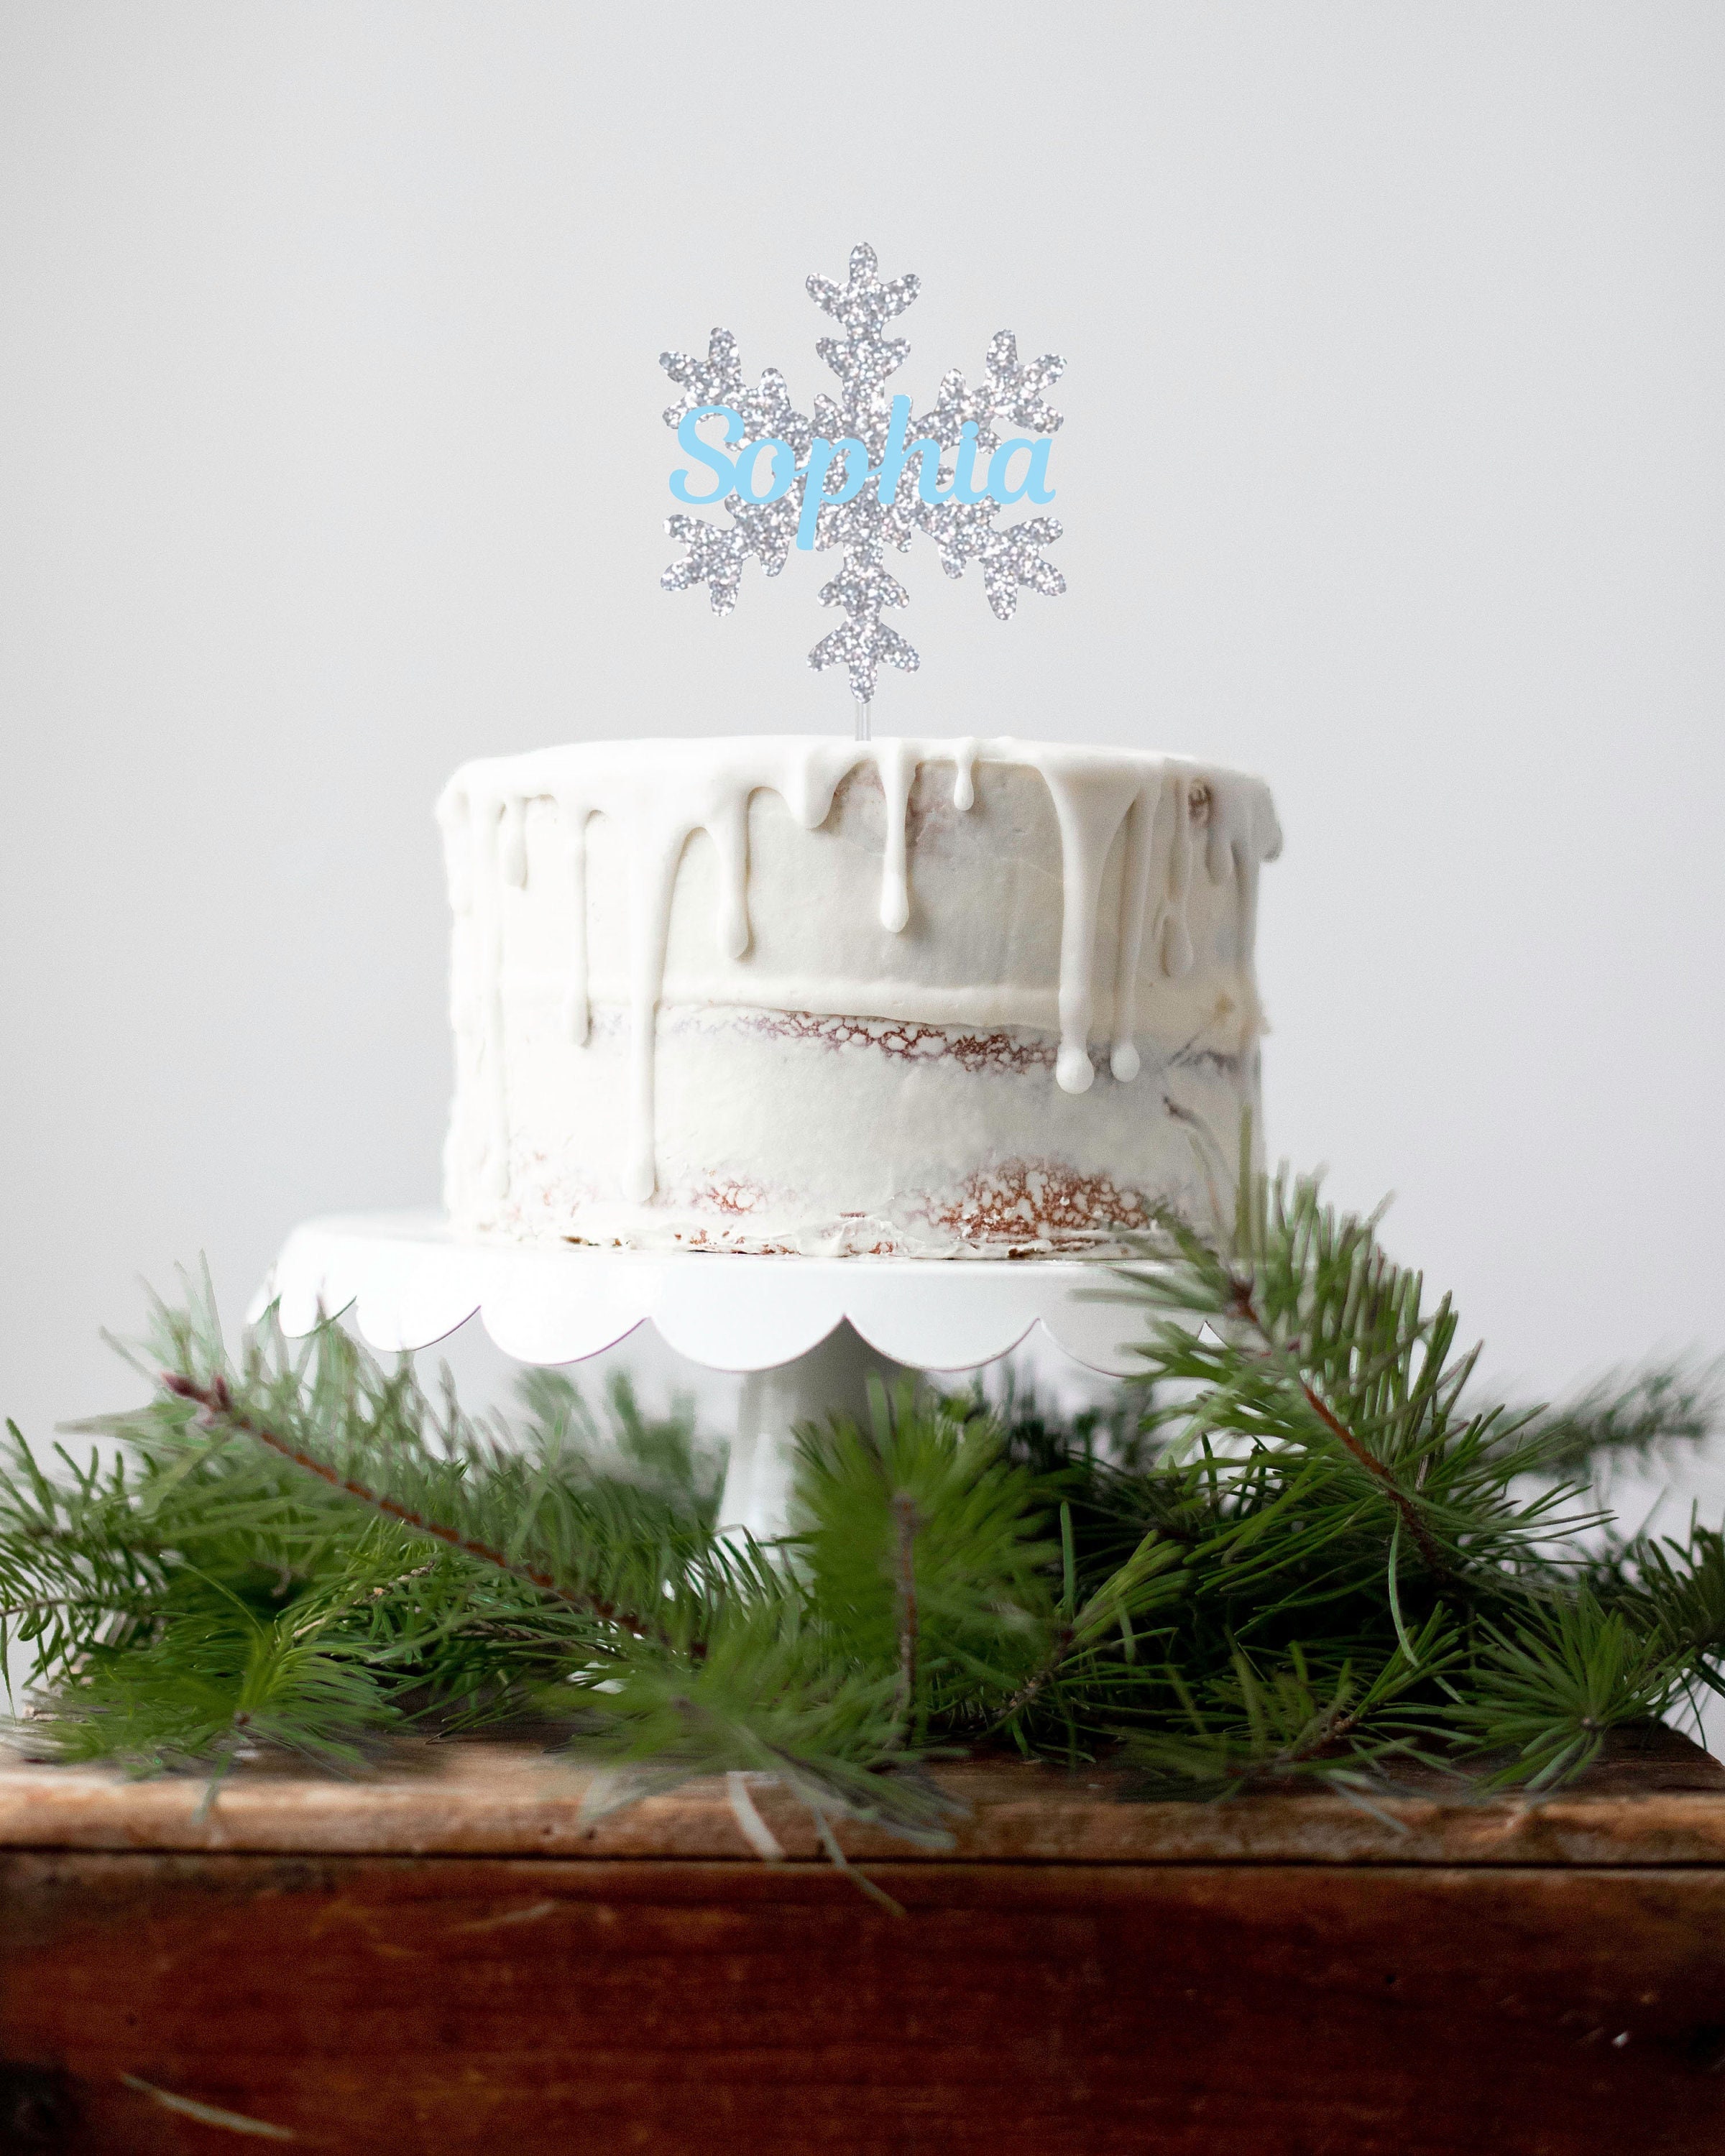 US$ 6.30 - Silver Snowflake Cake Topper Iridescent birthday Party